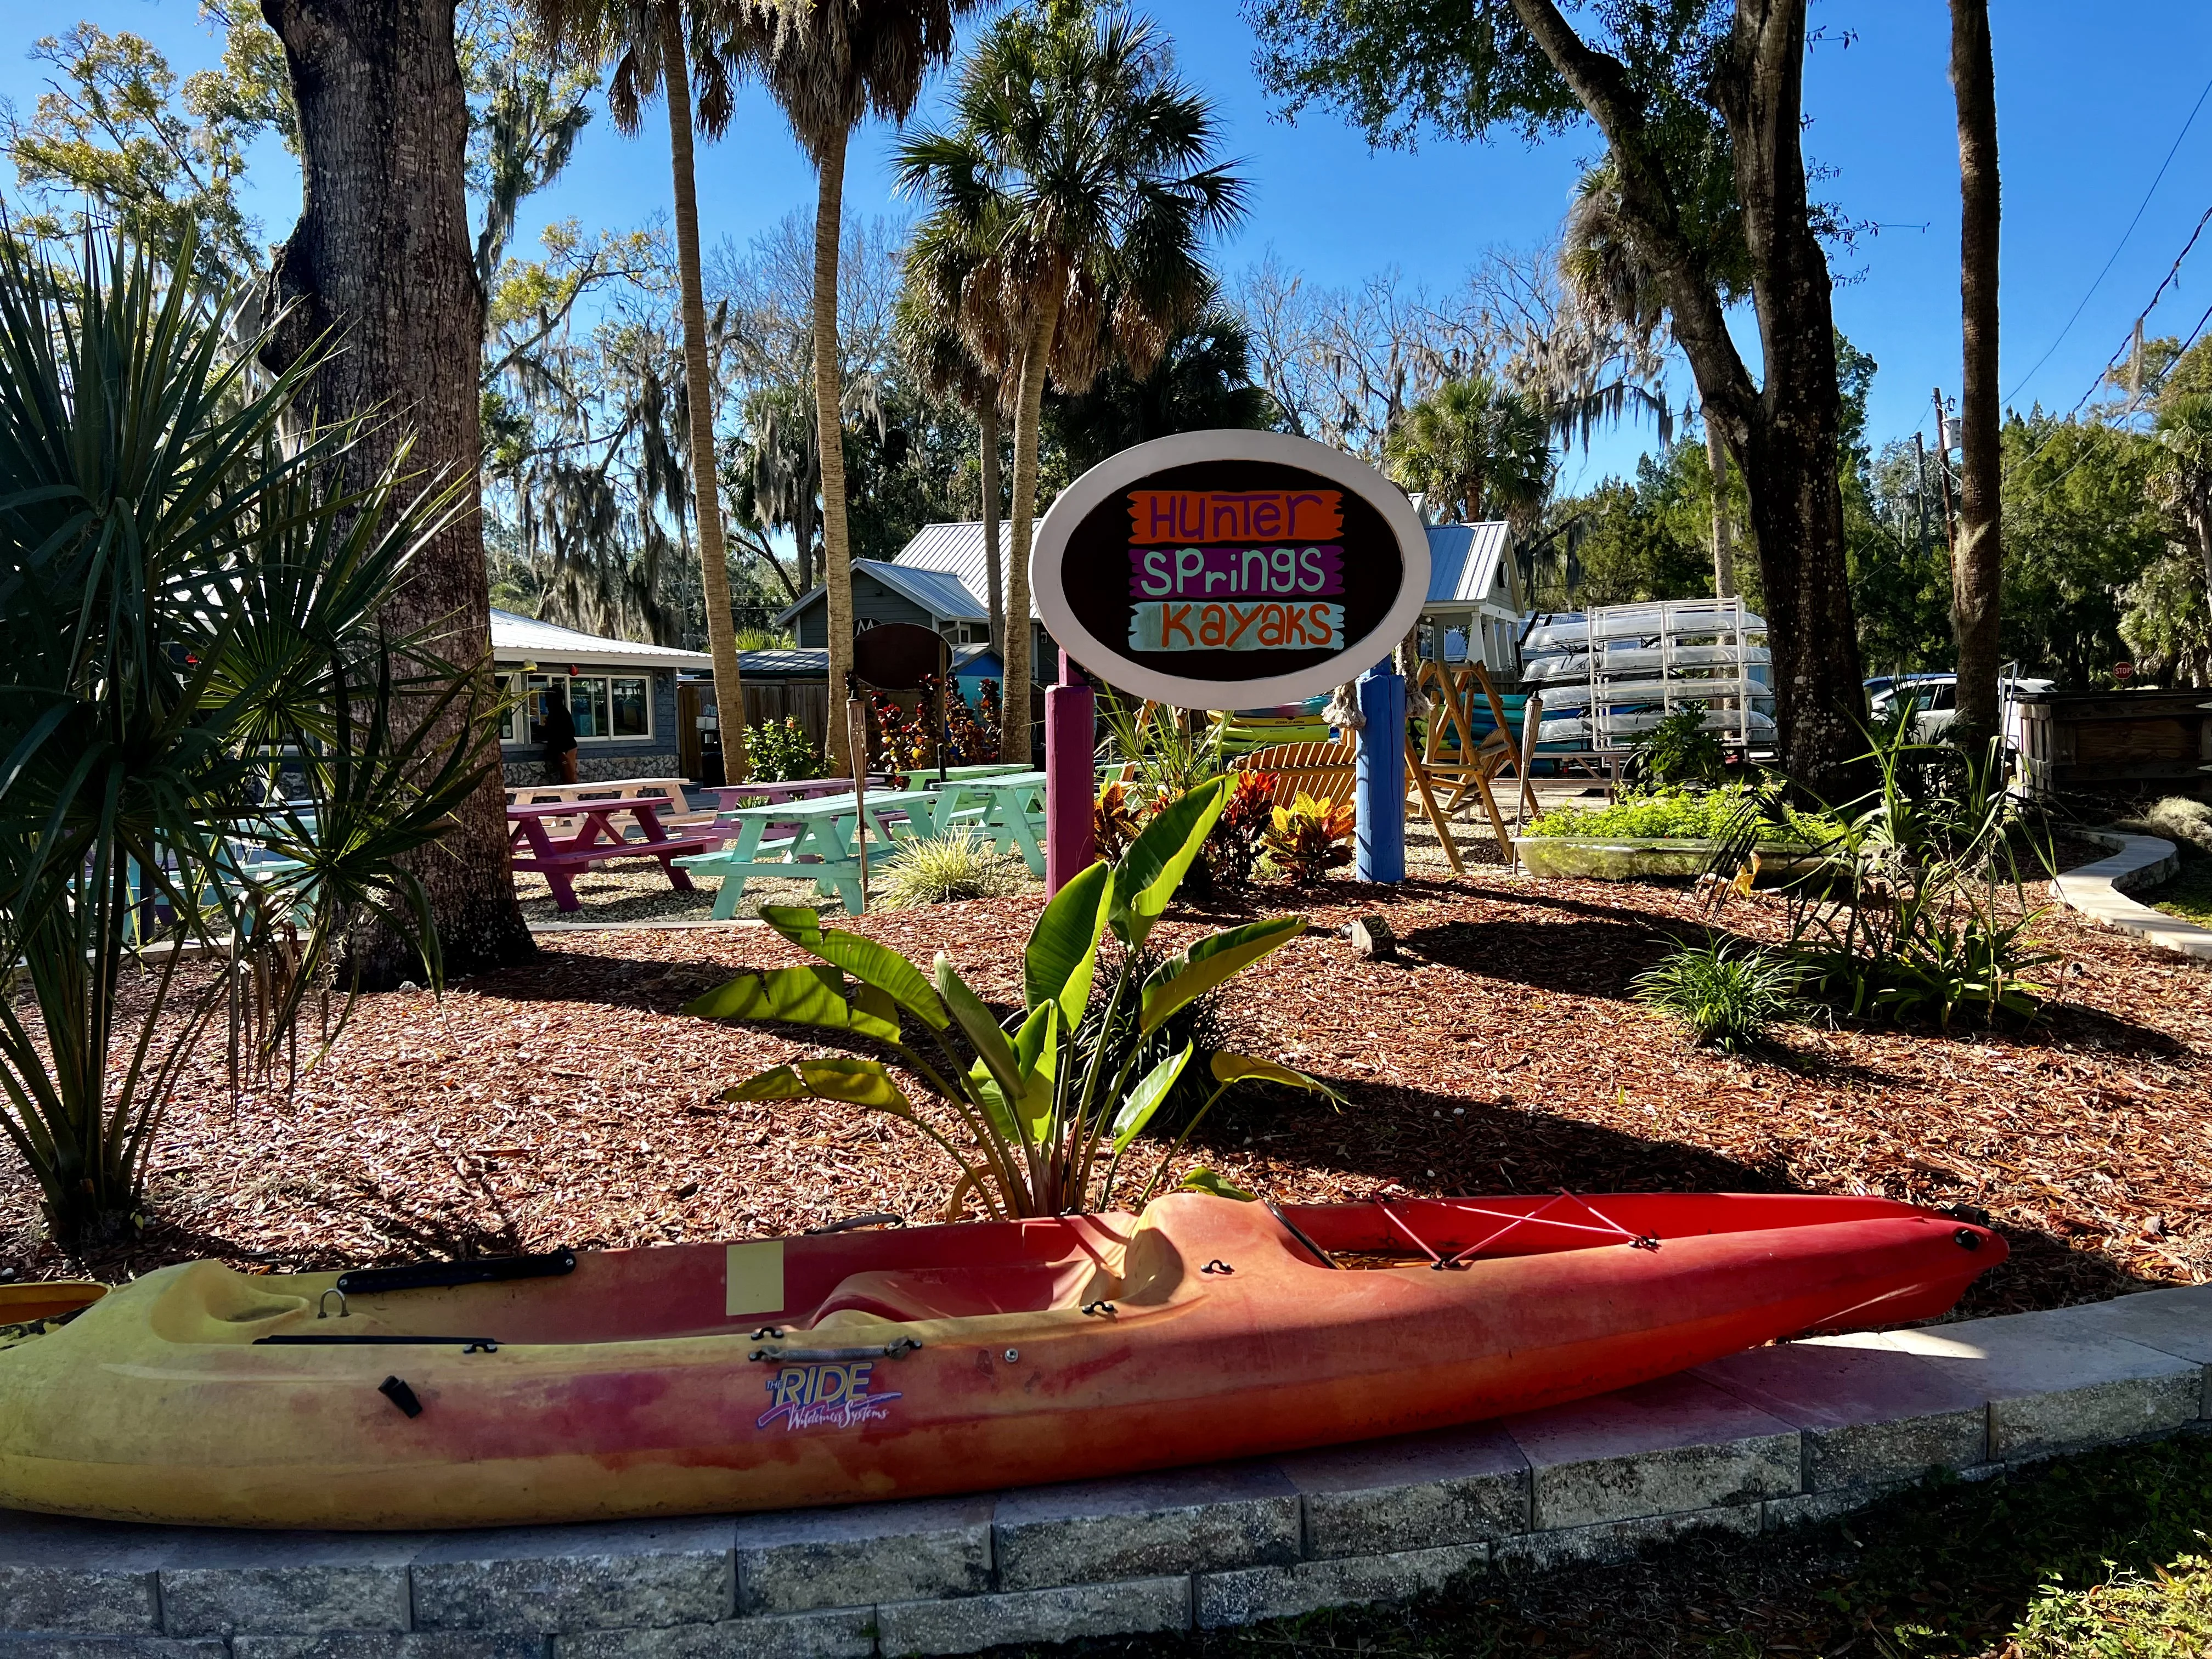 Kayaks in front of palm tree with hanging sign